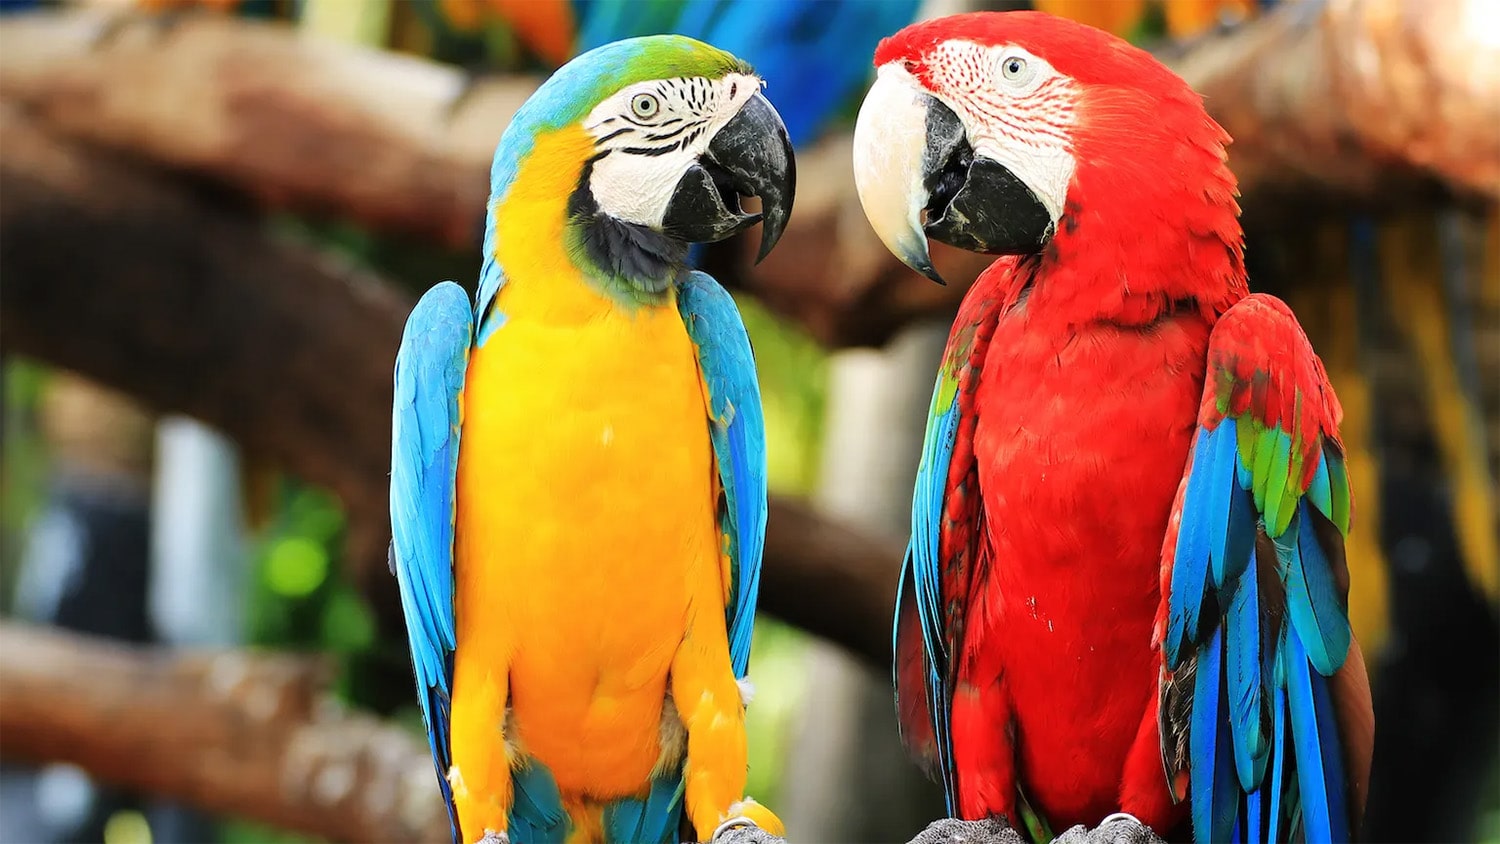 31 interesting facts about parrots